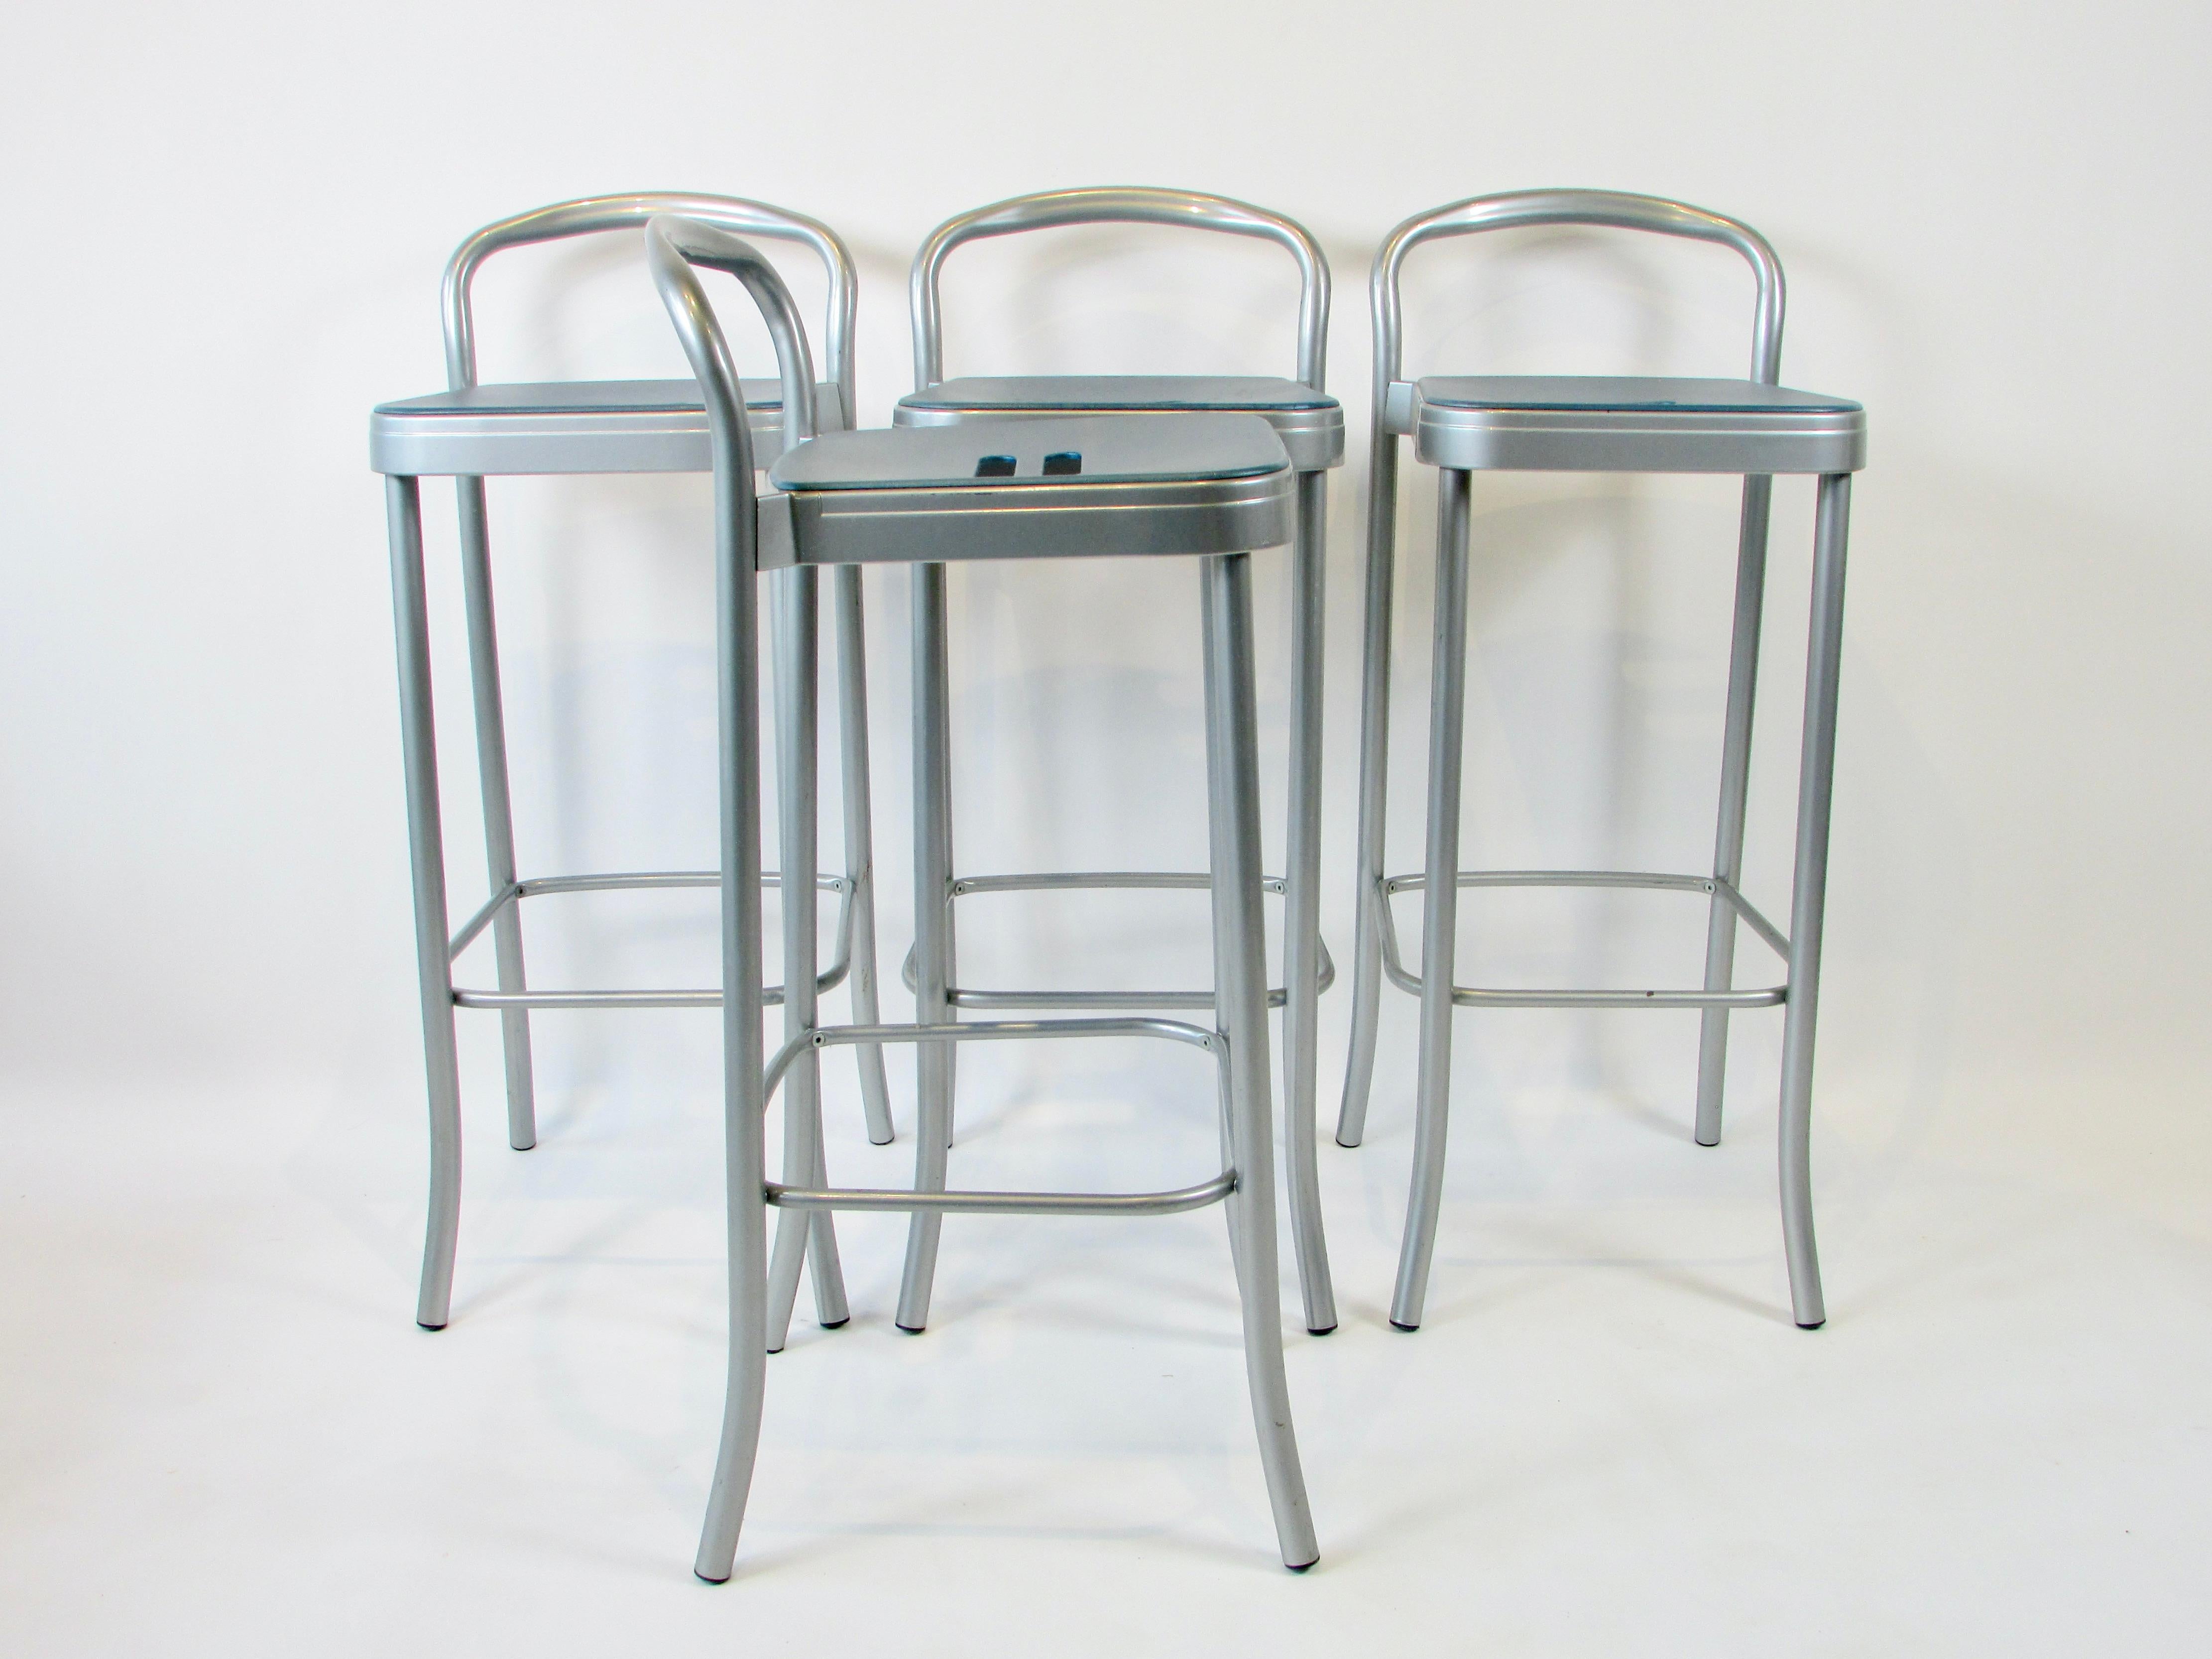 Four bar stools designed by Italian master Vico Magistretti for Kartell. Lightweight aluminum frames are powder coated supporting plastic seats with grab hole centers.